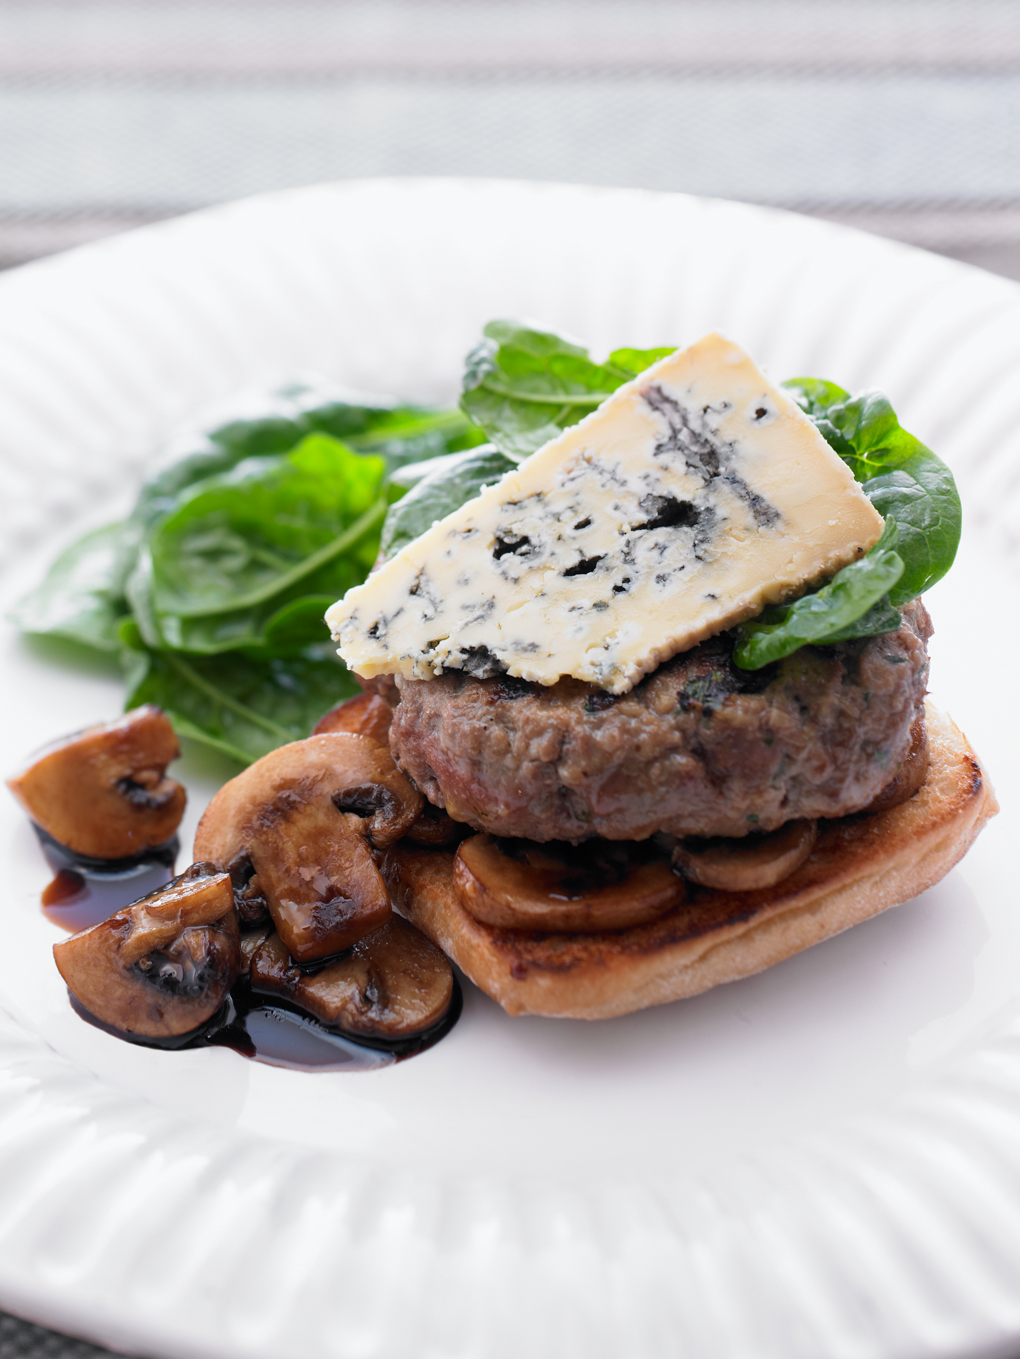 Blue Beef Burger with Balsamic Mushrooms and Spinach